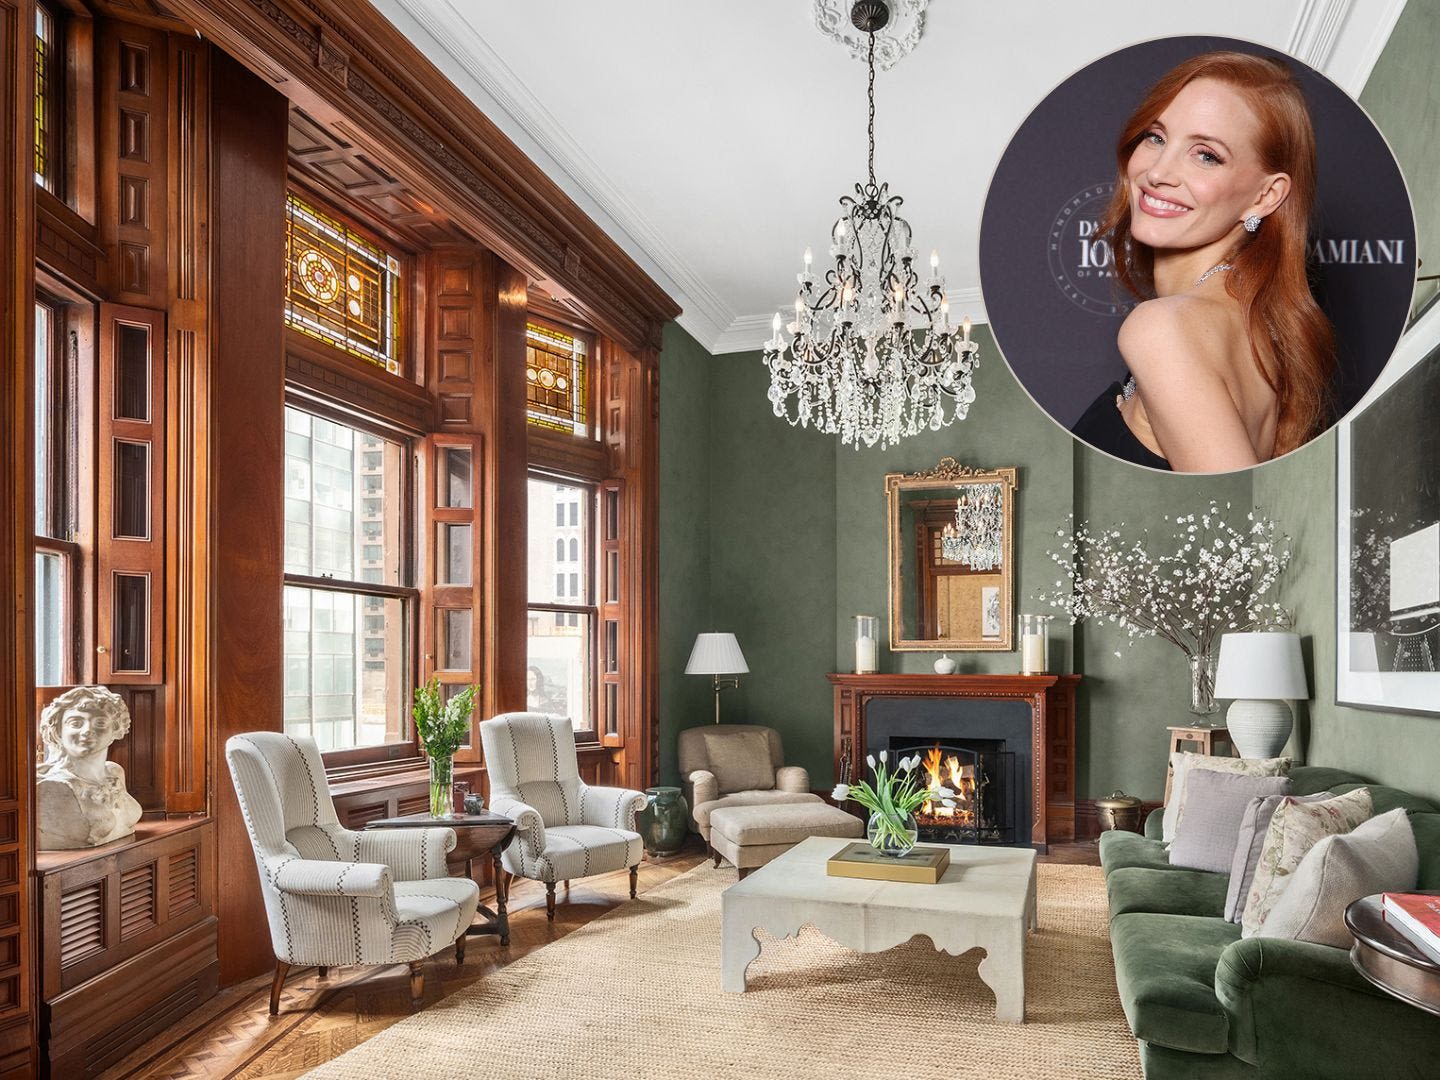 Jessica Chastain is selling her historic 4-bedroom apartment in New York City for $7.45 million. Take a look inside.